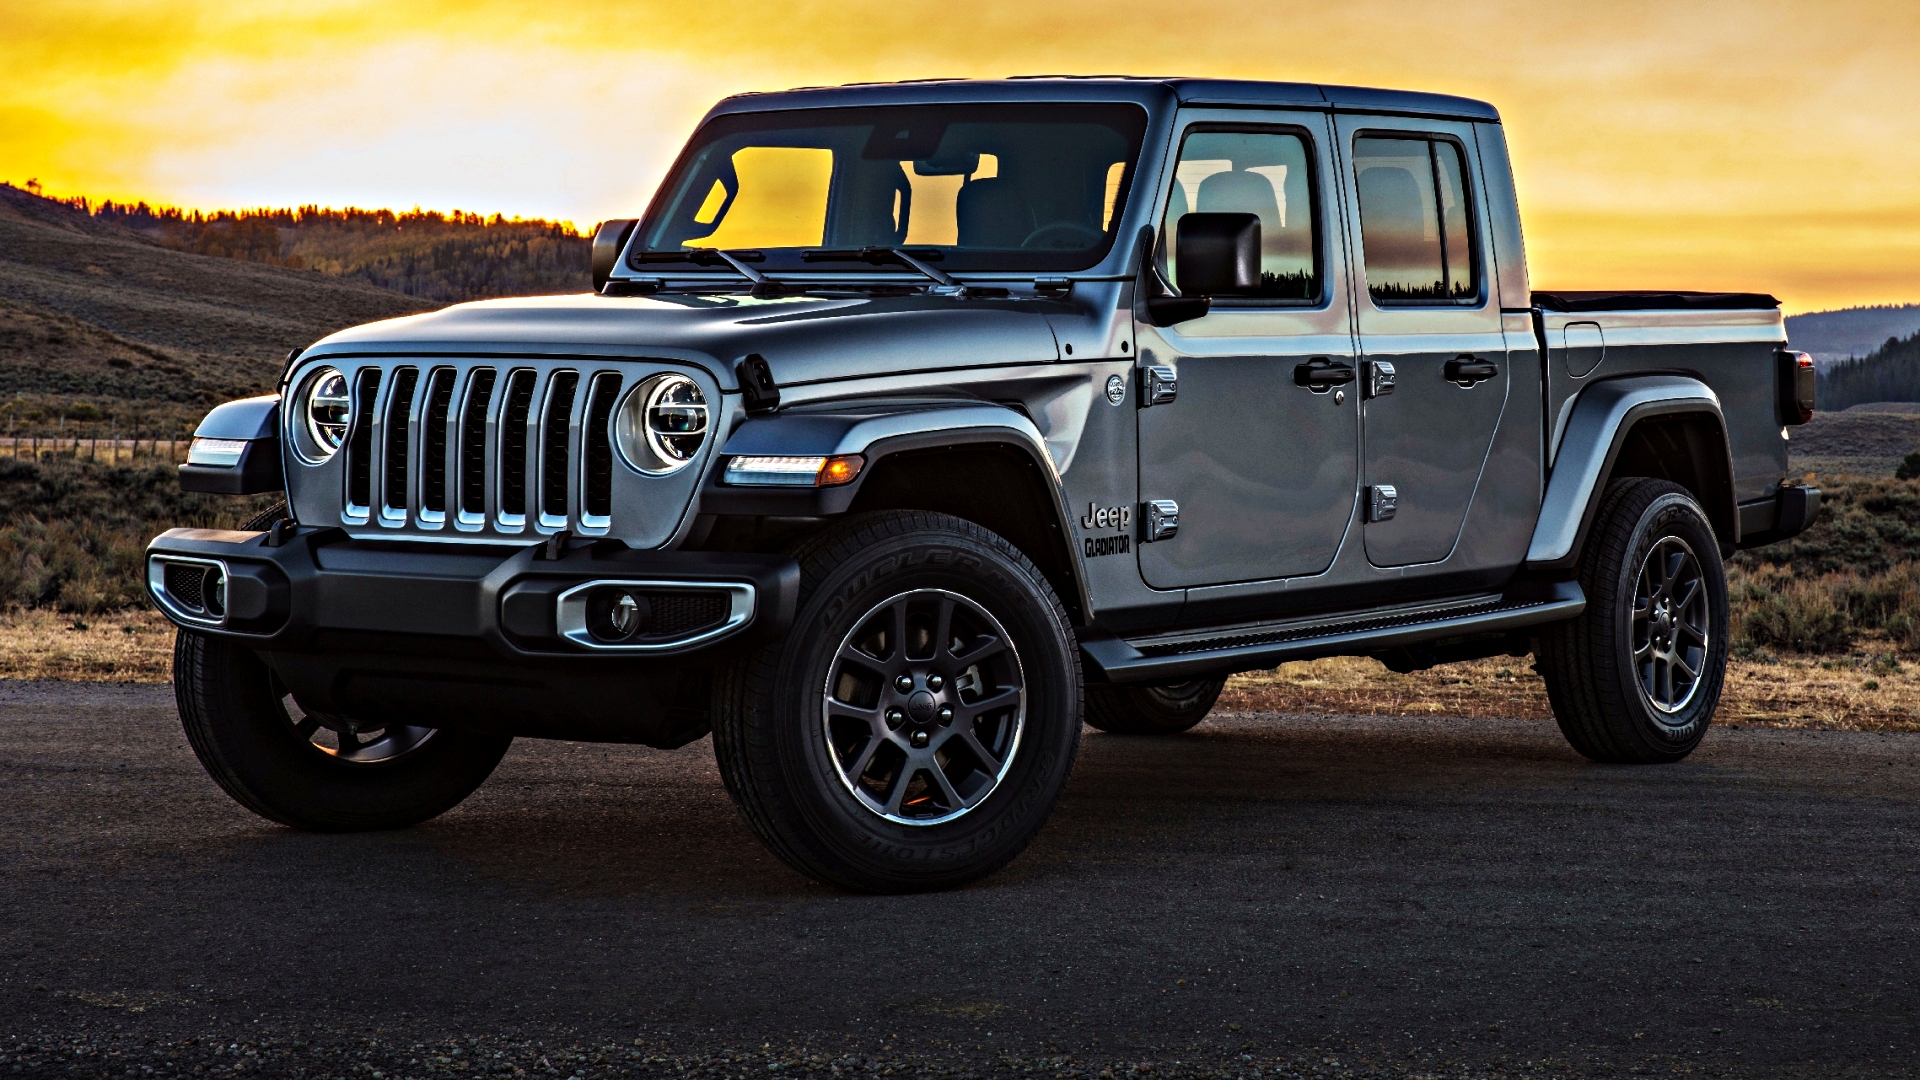 News - Jeep Gladiator Makes Its Entrance In LA – Here 2020?
